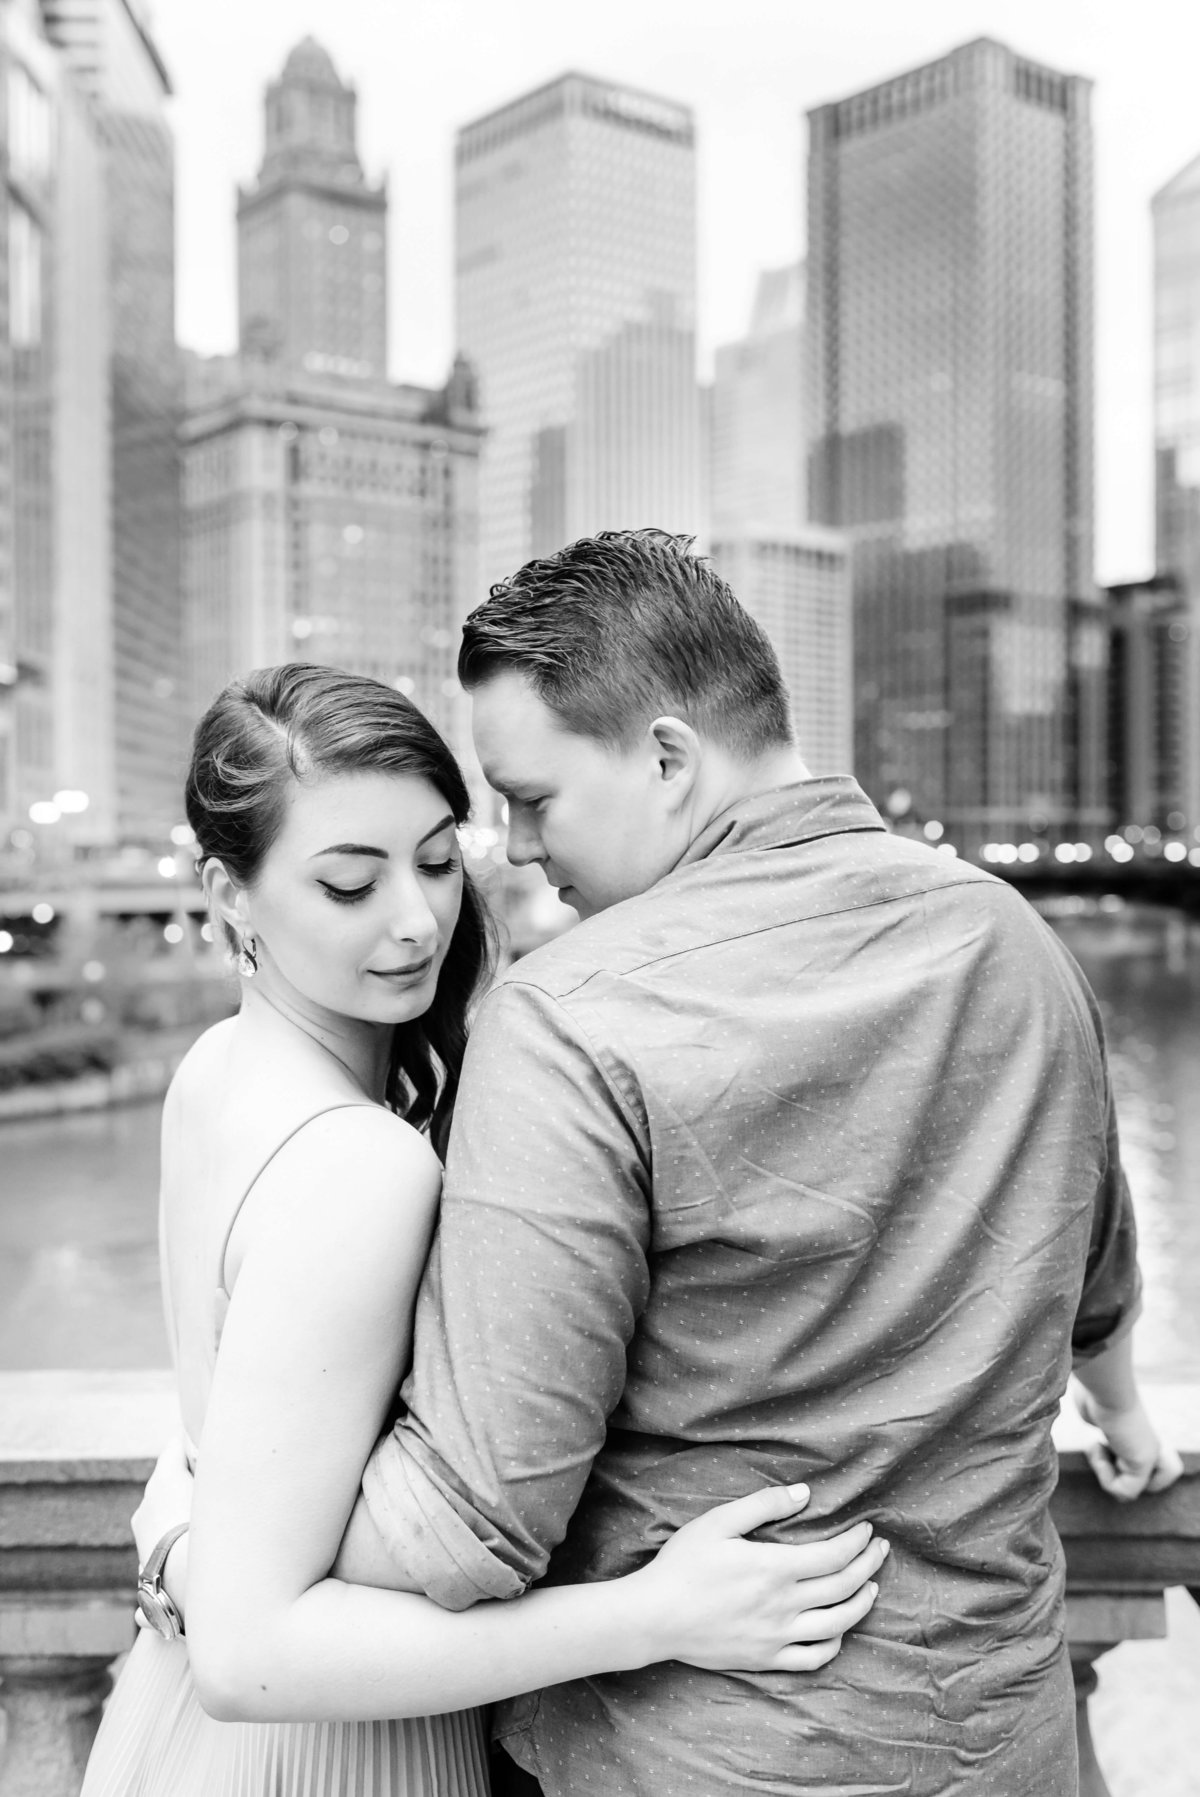 A quiet moment in black and white during this downtown Chicago, IL engagement session